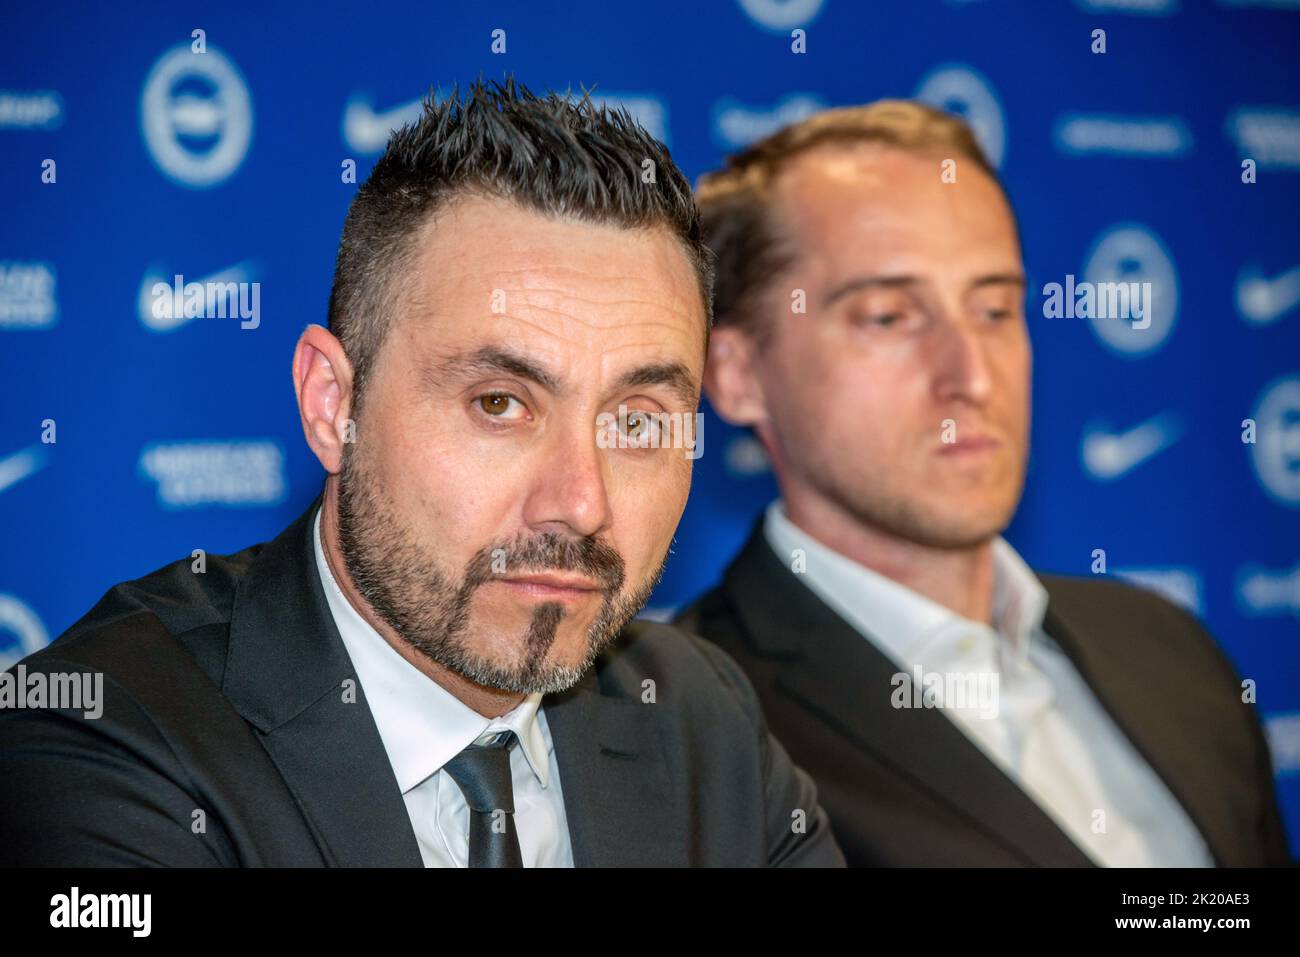 Brighton, September 20th 2022: Brighton and Hove Albion FC's new manager Roberto de Zerbi is introduced to the press this afternoon at the club's trai Stock Photo